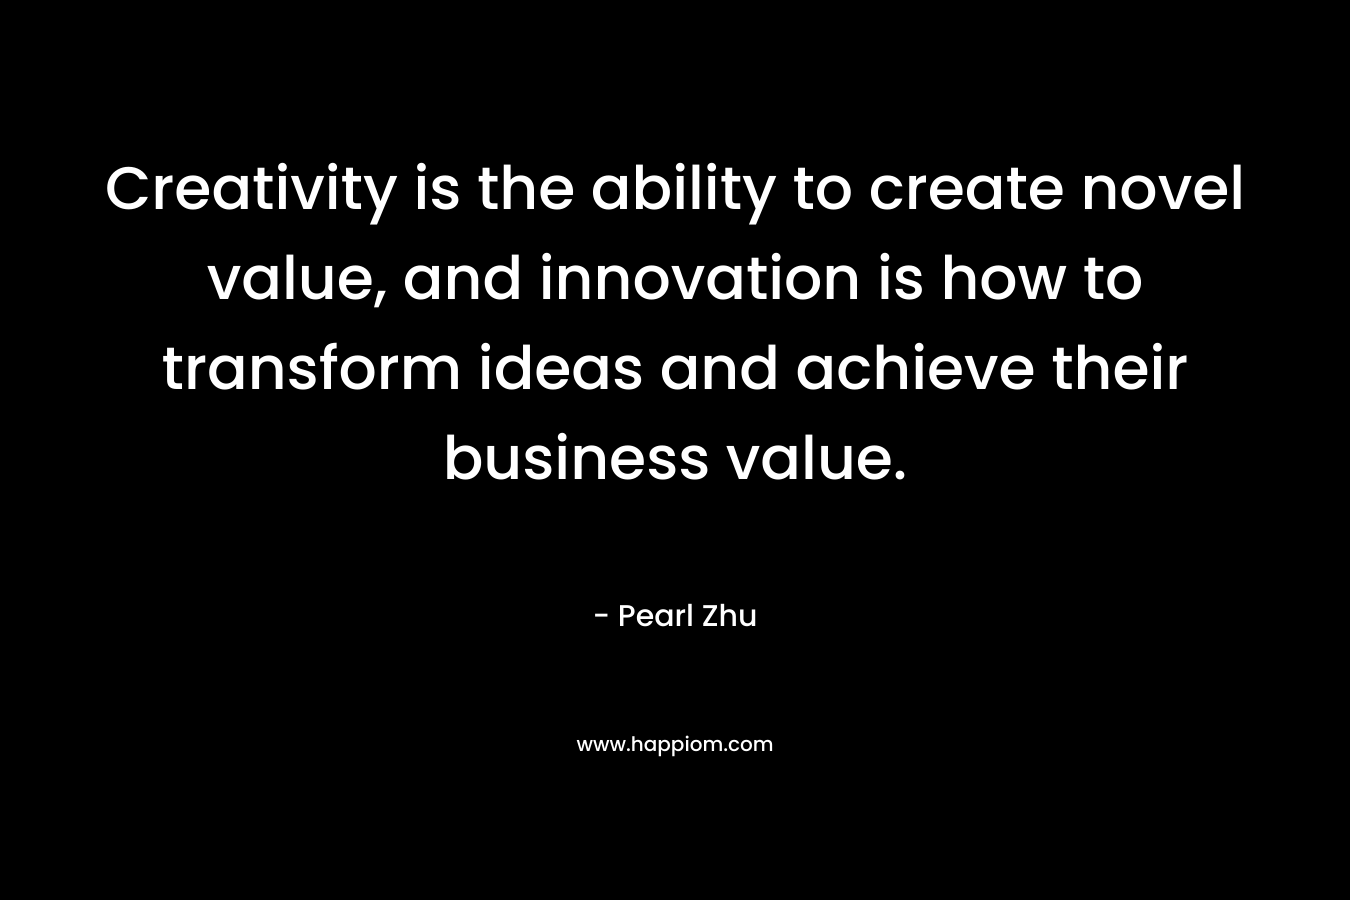 Creativity is the ability to create novel value, and innovation is how to transform ideas and achieve their business value.